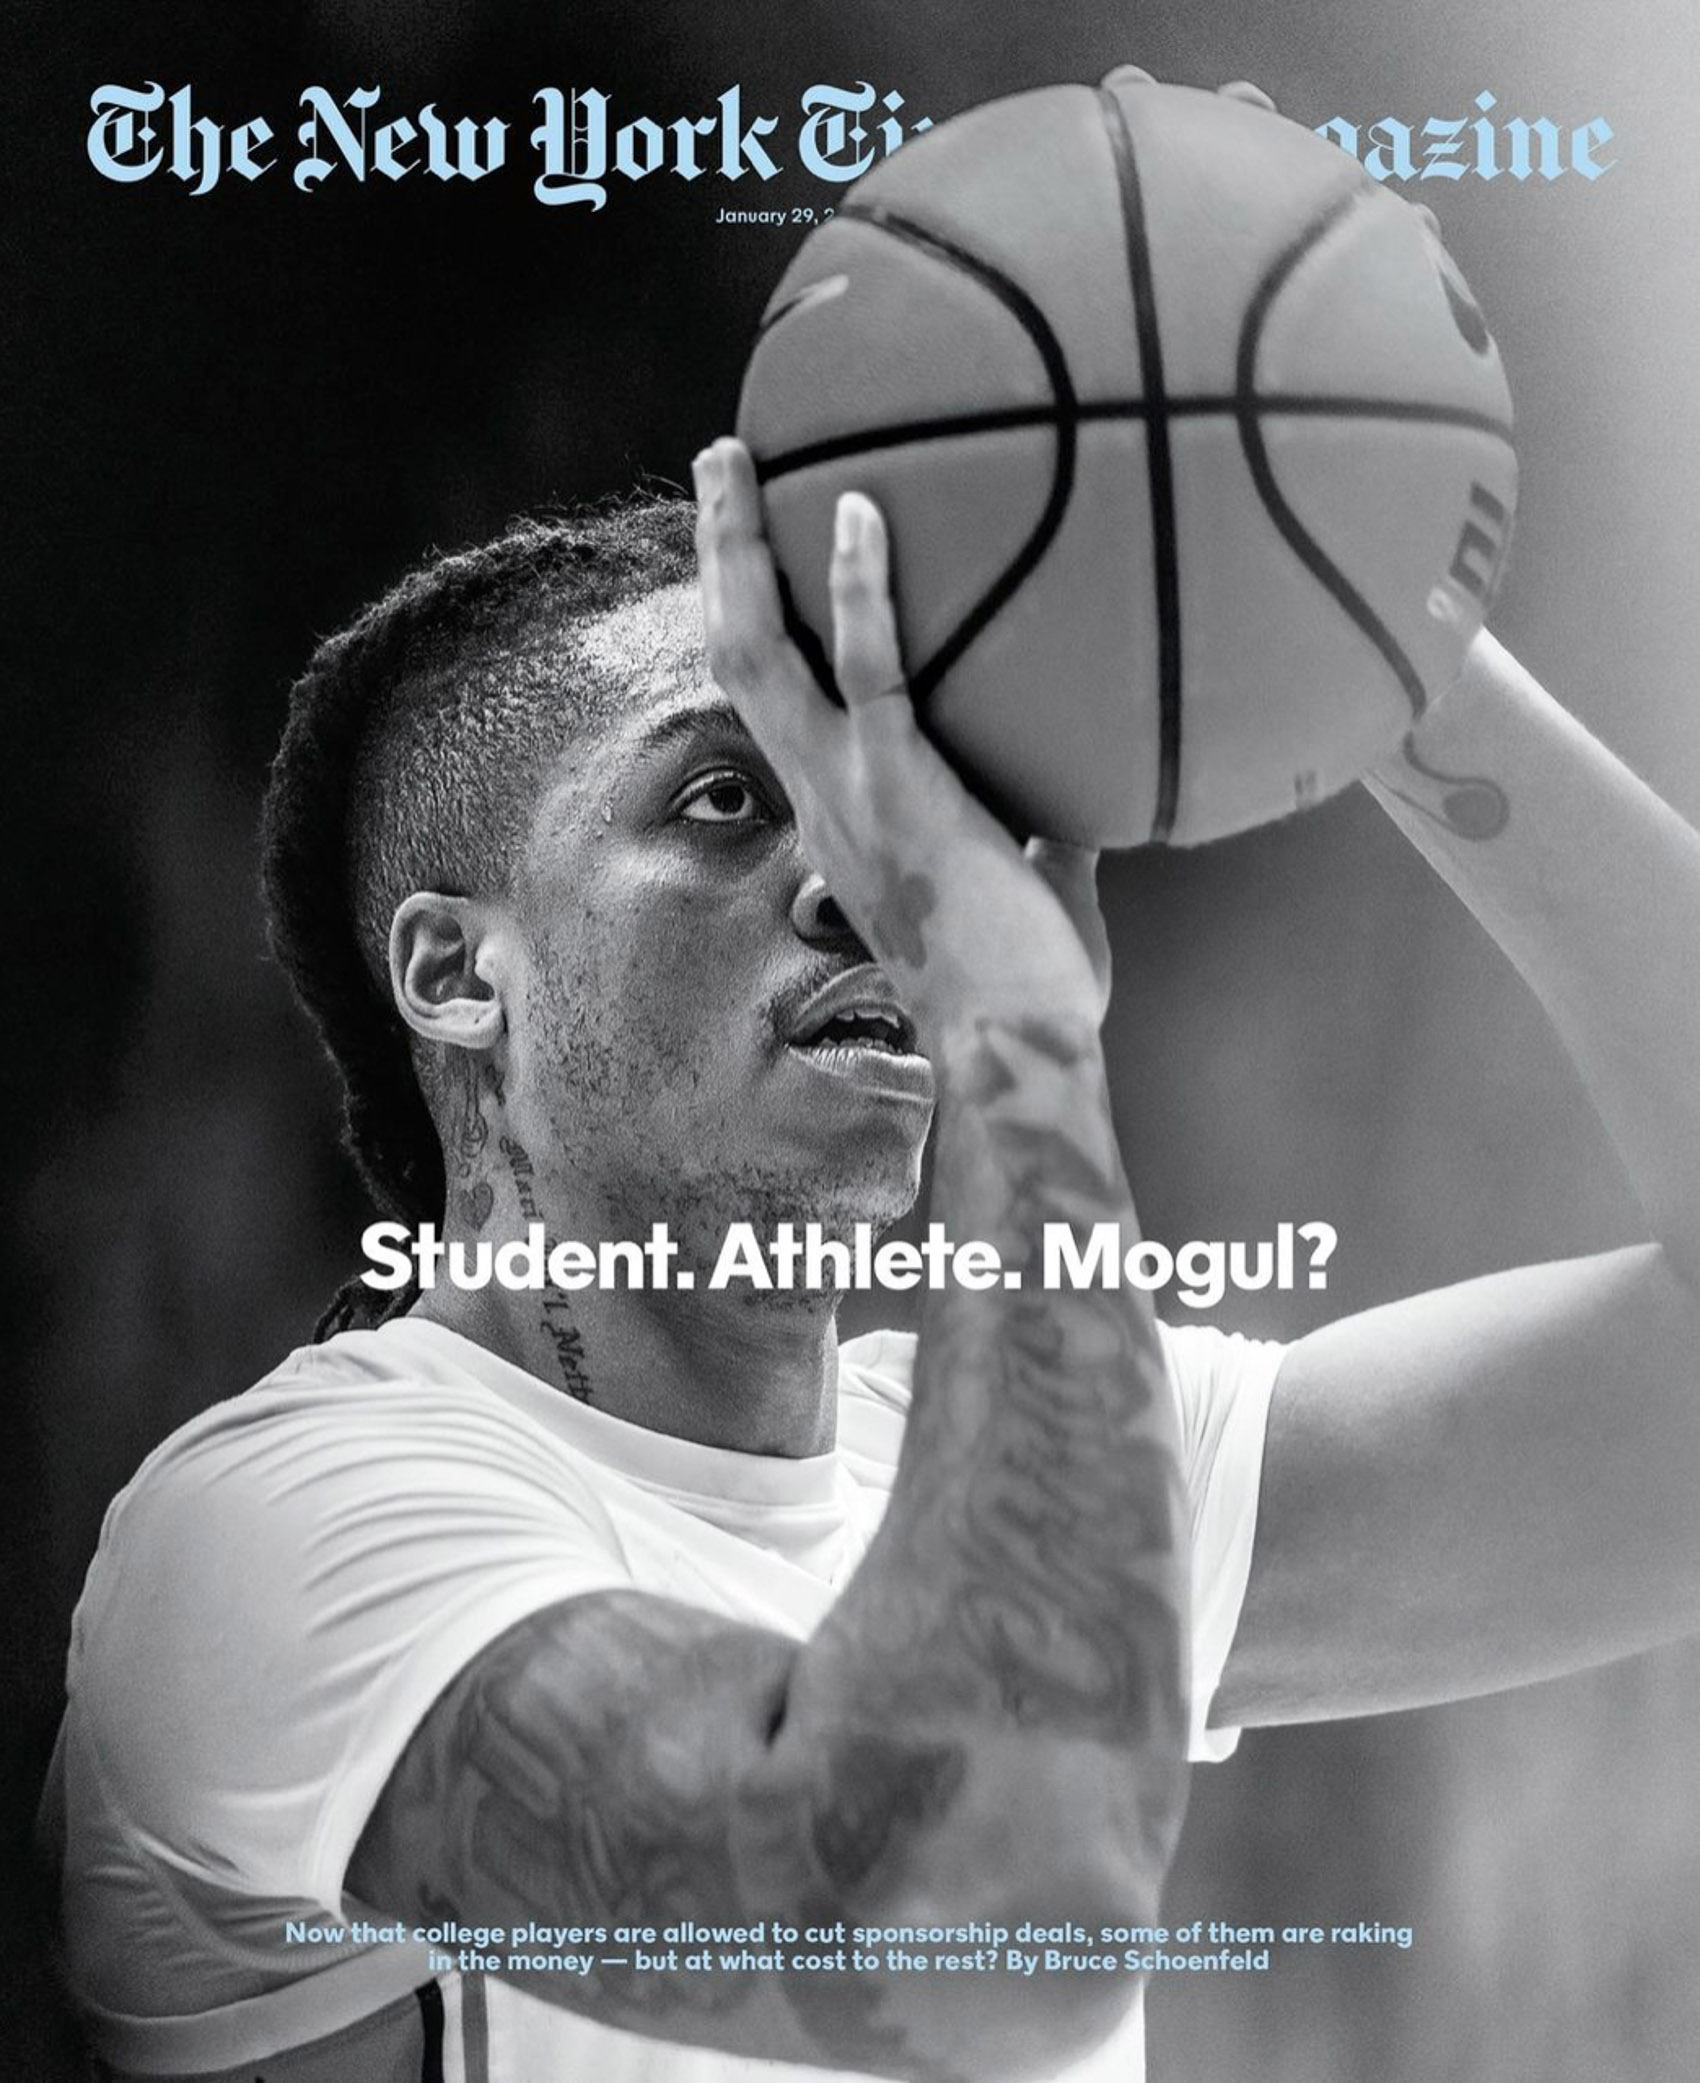 NEW YORK TIMES MAGAZINE COVER STORY UNC TARHEELS BASKETBALL STAR ARMANDO BACOT NIL DEAL MARCH MADNESS COMMERCIAL SPORTS ADVERTISING CAMPAIGN PHOTOGRAPHER